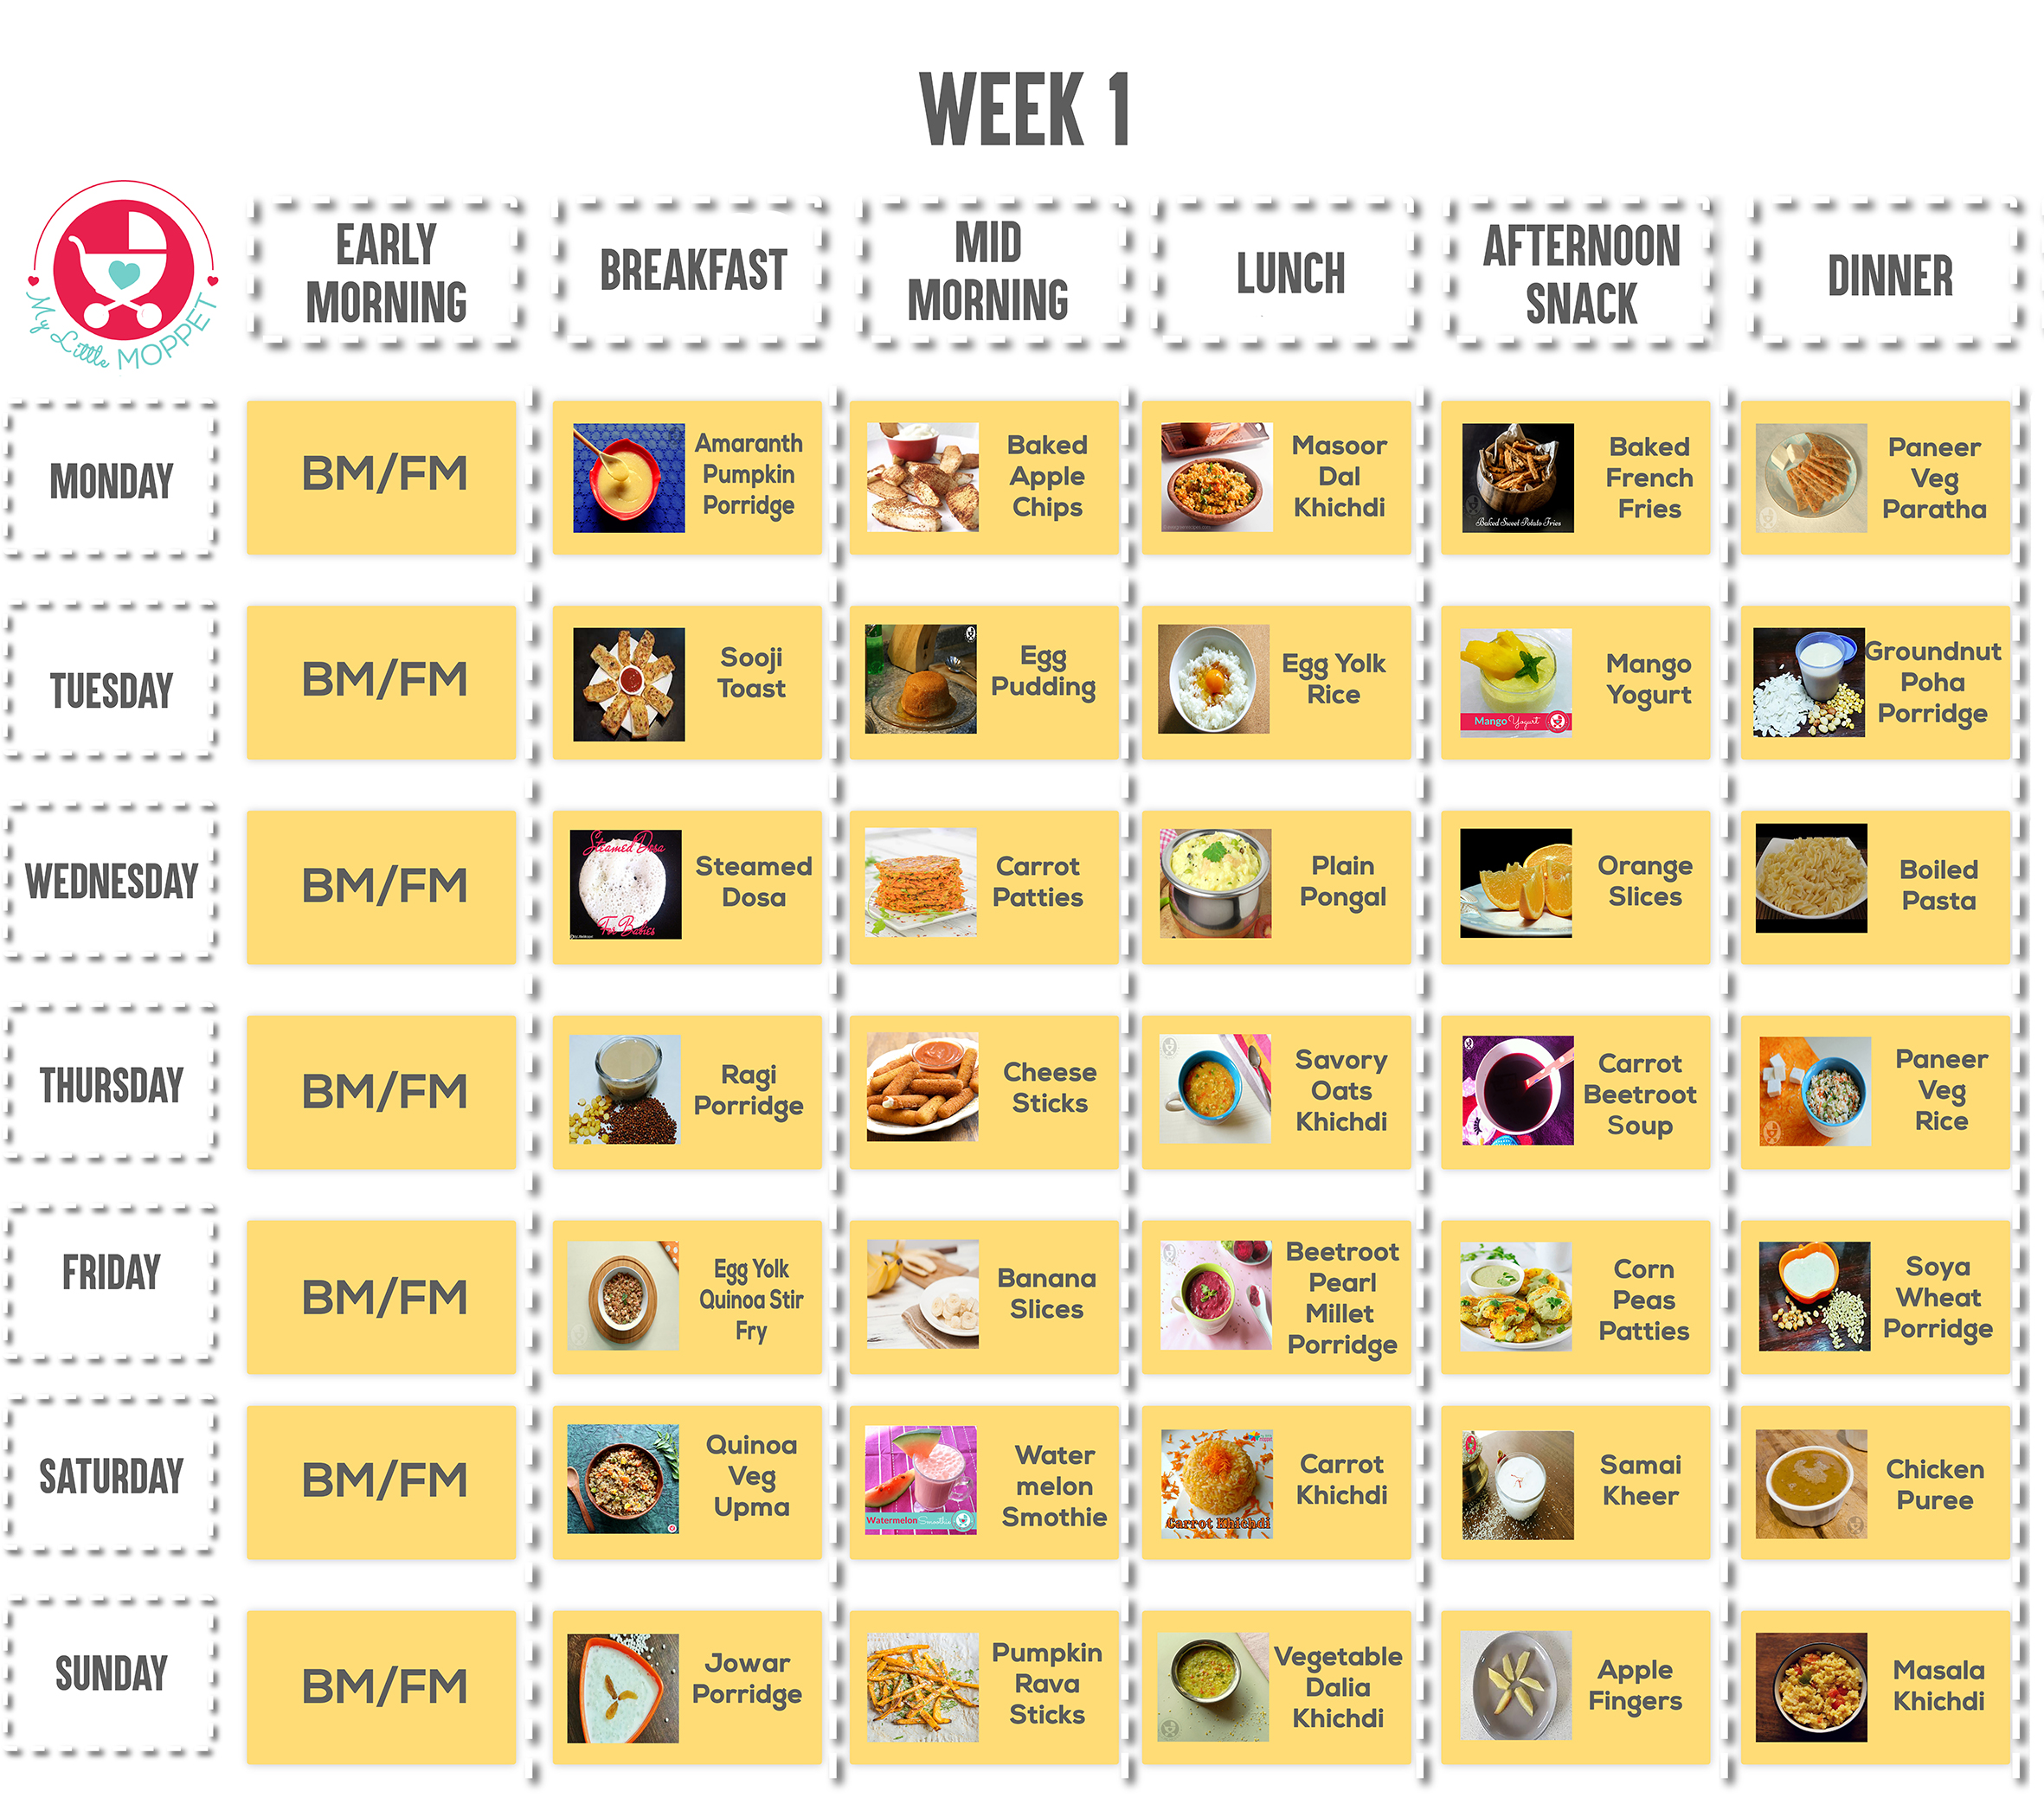 10 Months Baby Food Chart with Indian Recipes